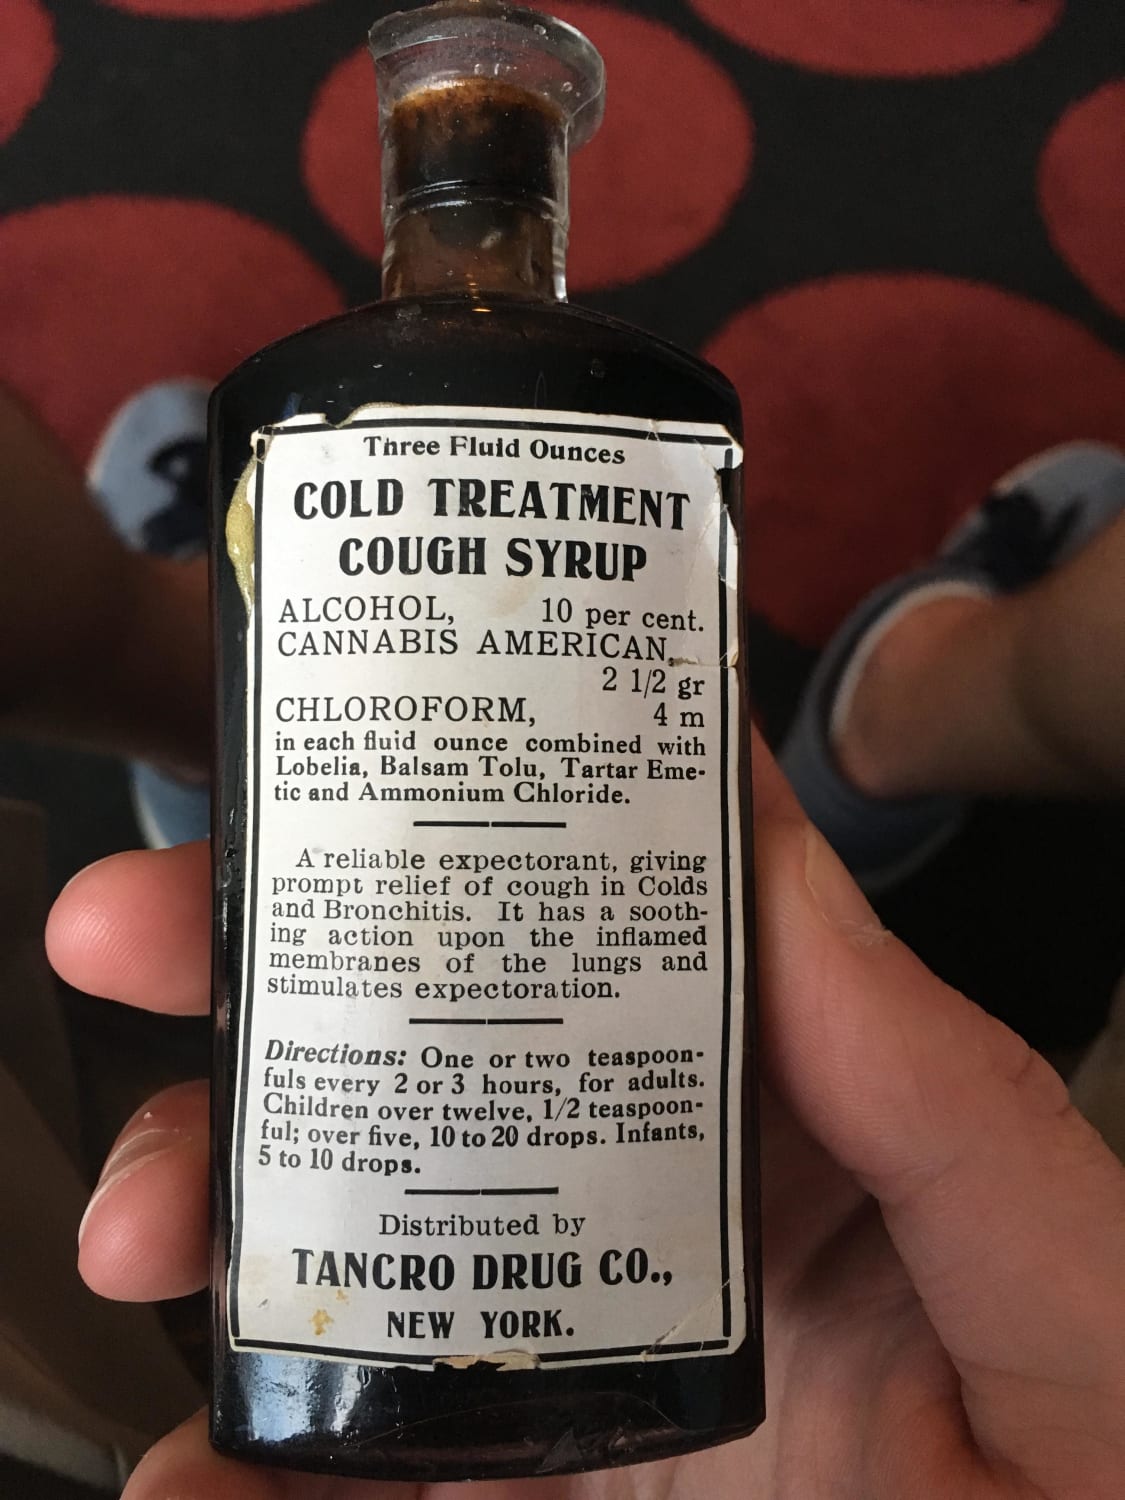 From back when medicine had a "kick" to it. My dad has this bottle and it's still full.